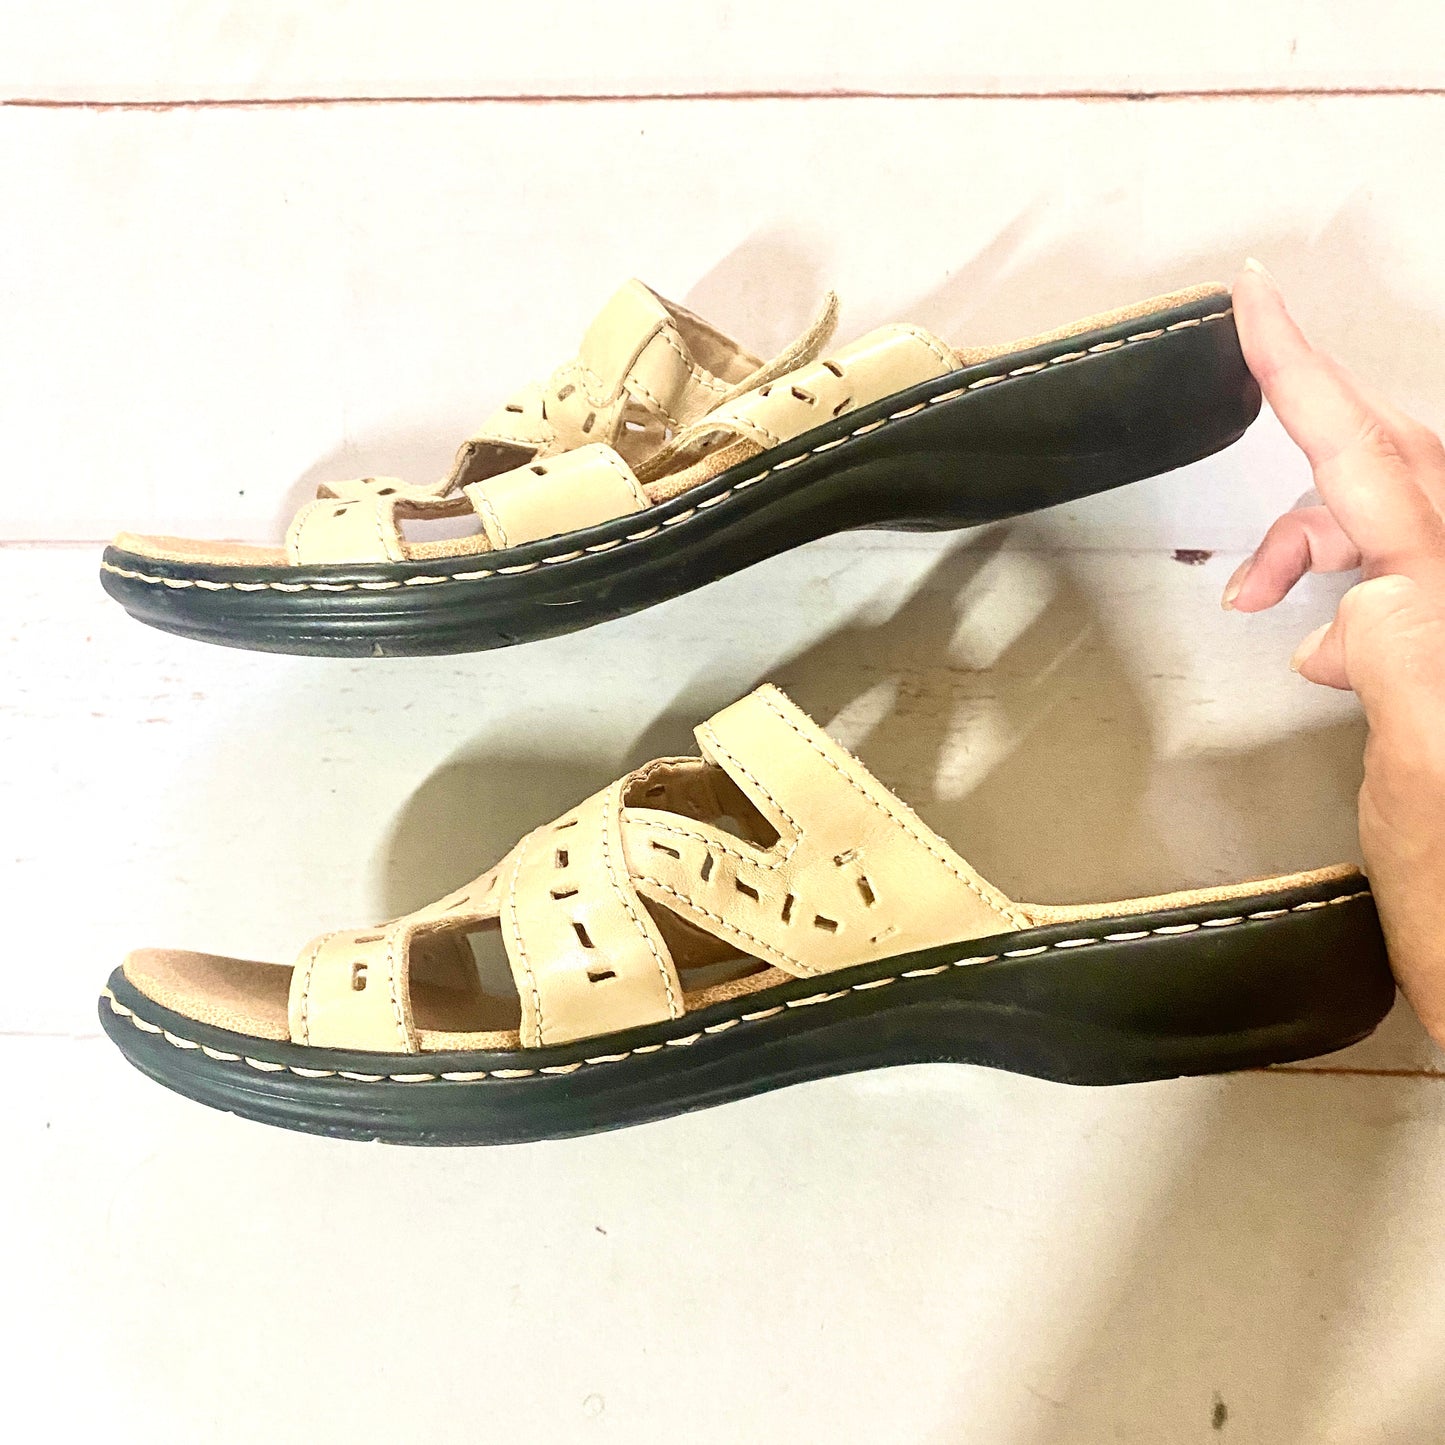 Sandals Flats By Clarks  Size: 8.5